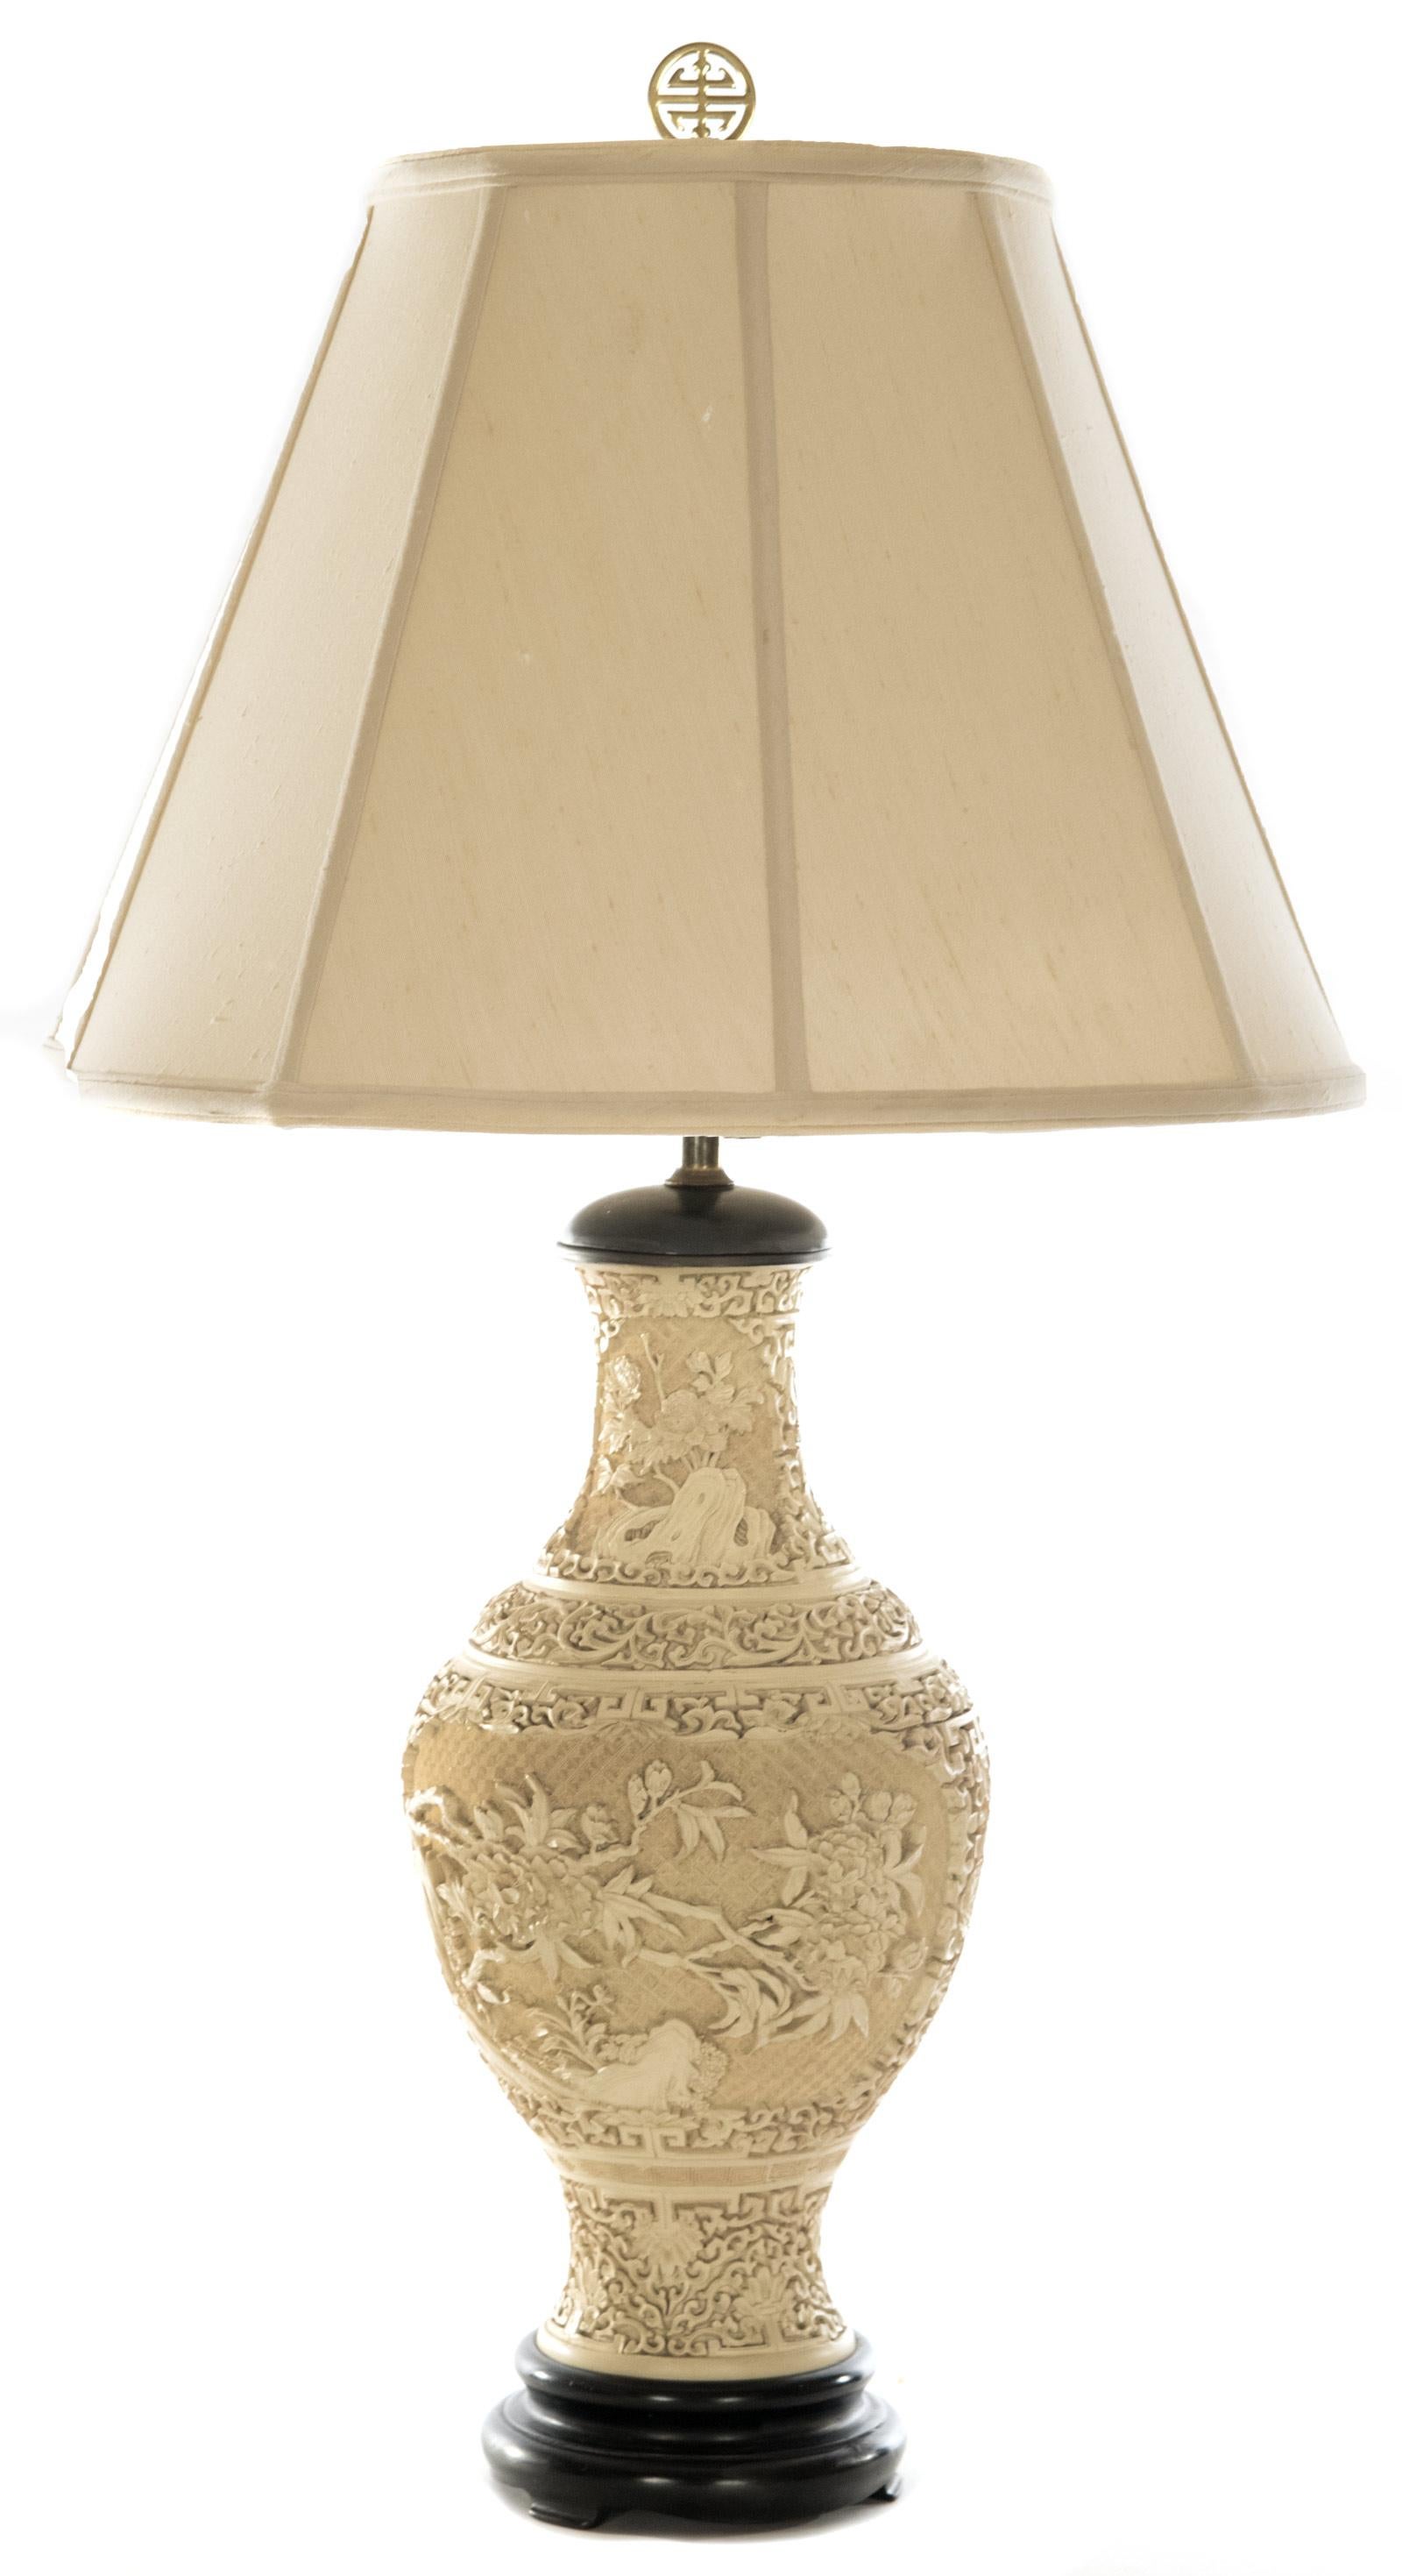 A 19th century hand-carved white Cinnabar table lamp of baluster form, topped with a cream shade and pierced gold finial, the body fitted between a wood neck cap and a stepped footed base. The body is covered all-over in high relief flowers and